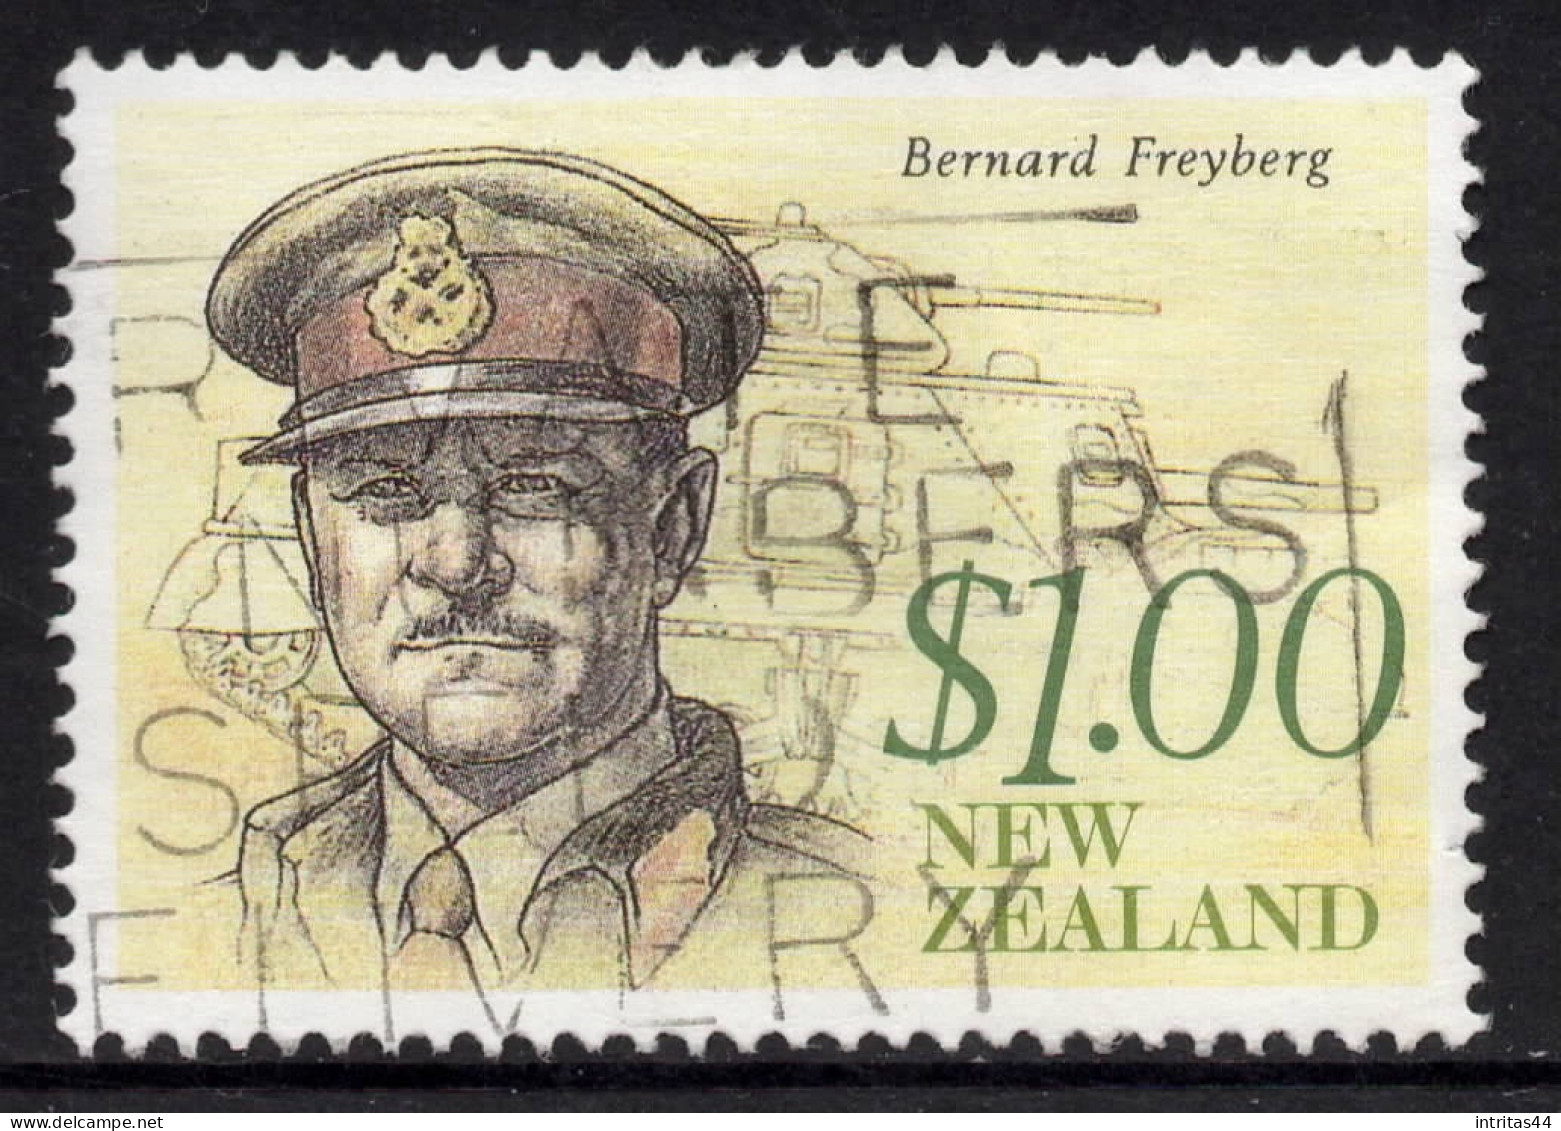 NEW ZEALAND 1990 HERITAGE-THE ACHIEVERS  $1.00 " FREYBERG "  STAMP VFU - Usados